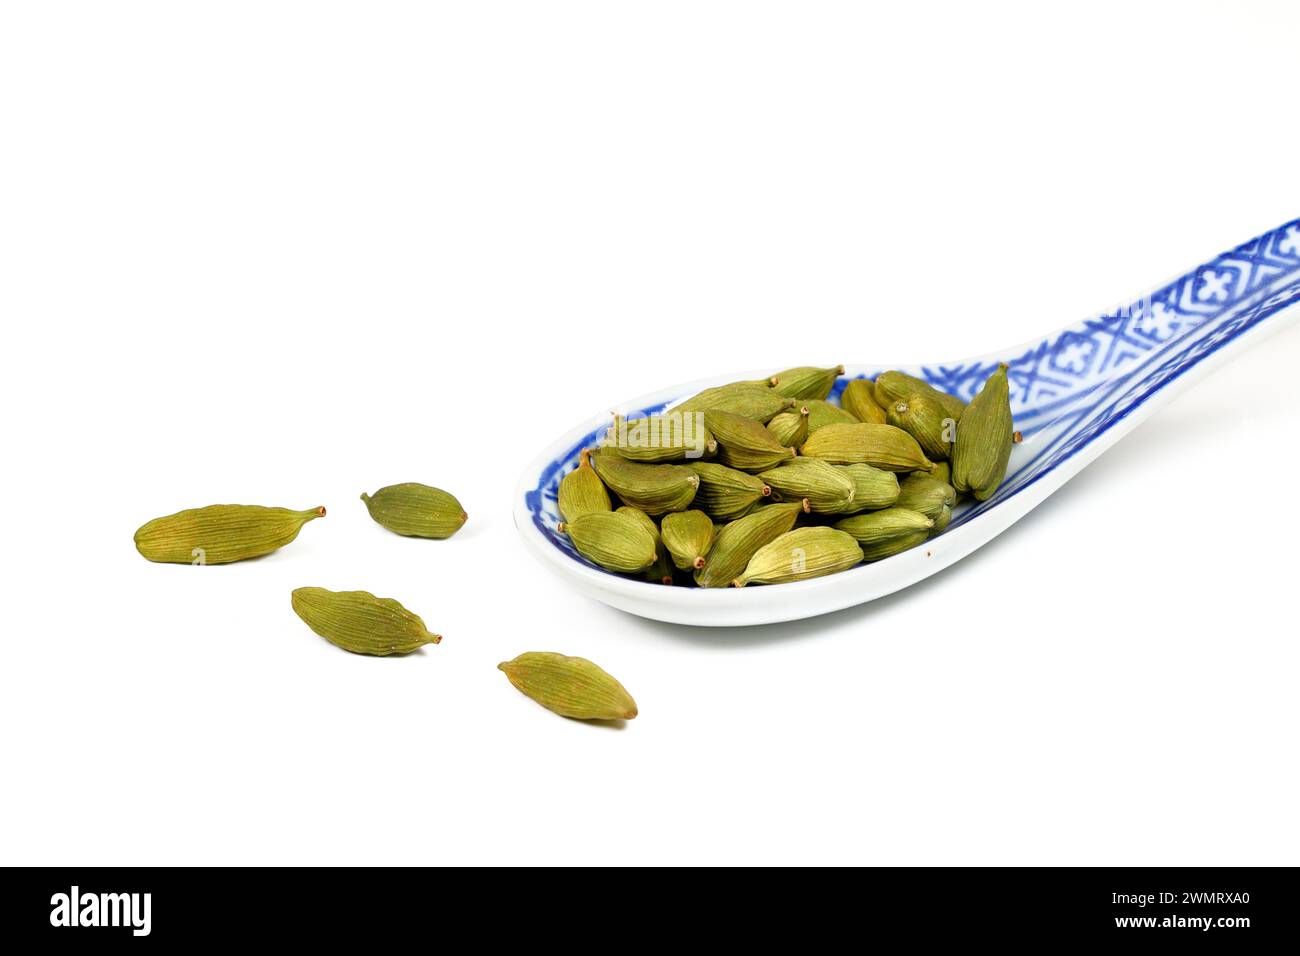 A soup spoon of dried Green Cardamom pods (Elettaria cardamomum) isolated on a white background. cutout for illustration and editorial use. Stock Photo